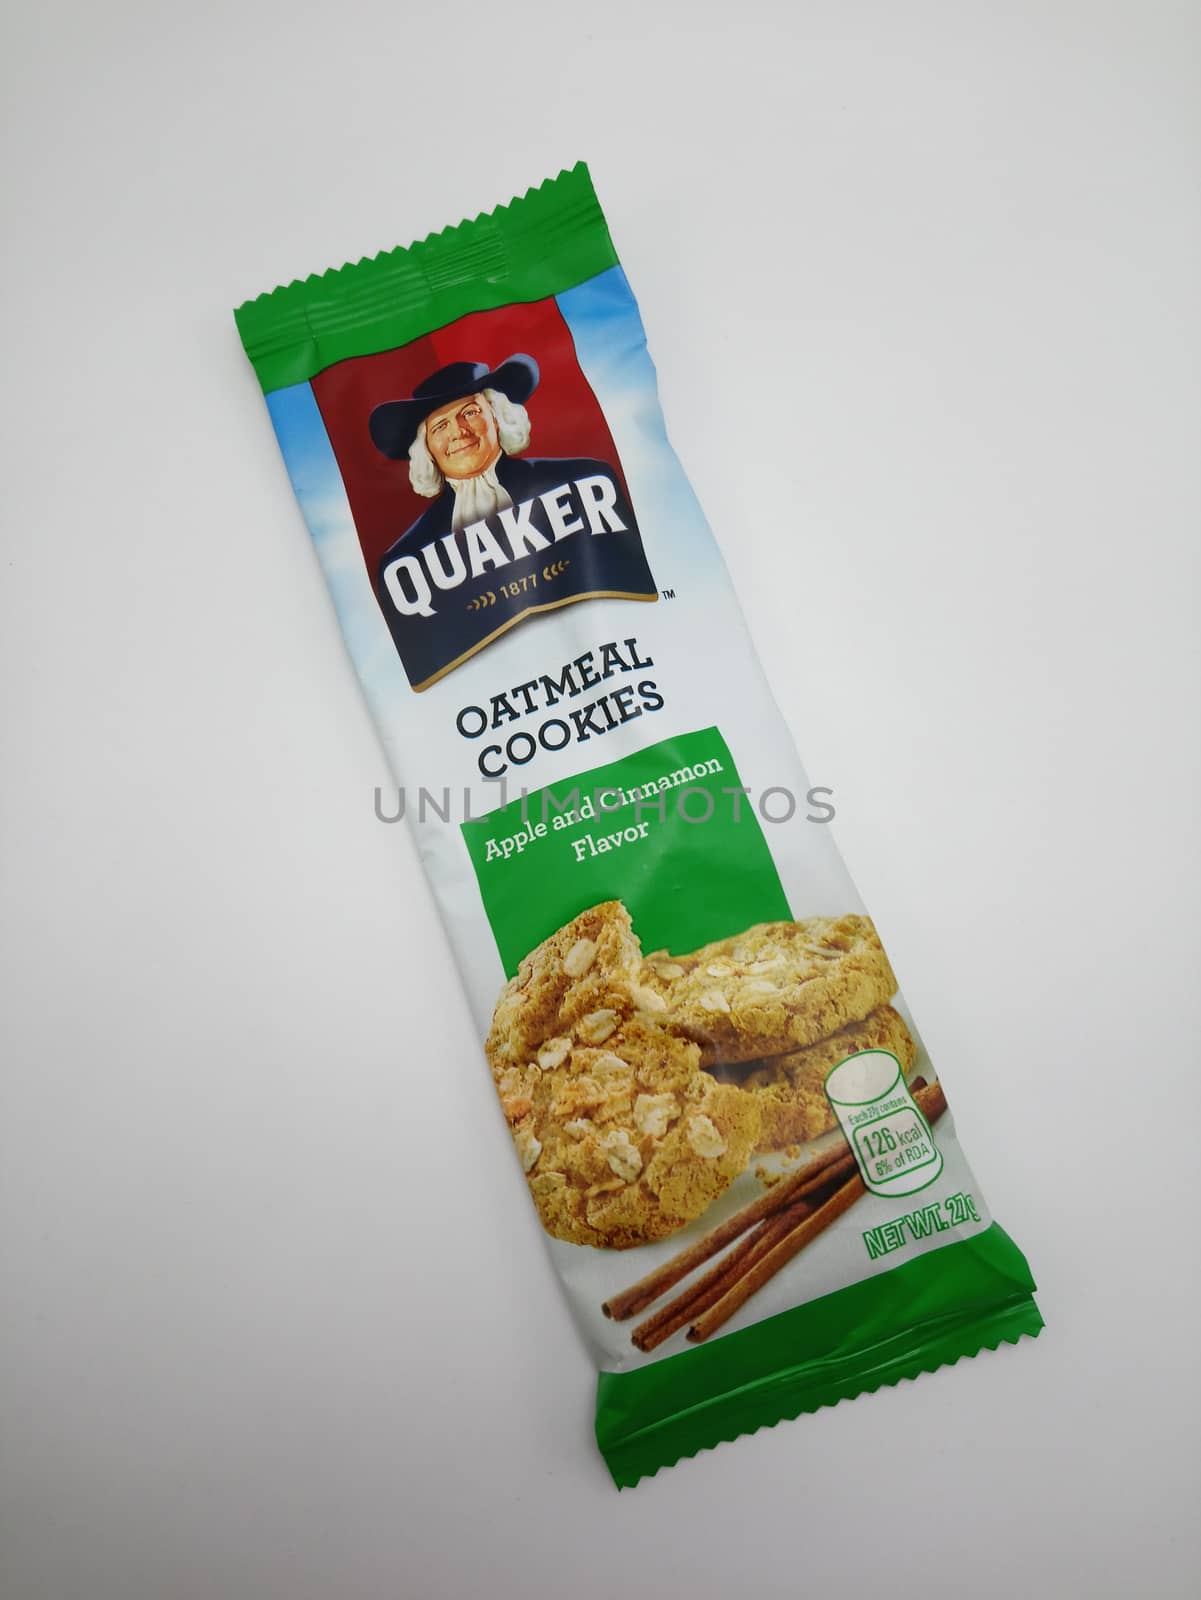 MANILA, PH - SEPT 25 - Quaker oatmeal cookies apple and cinnamon flavor on September 25, 2020 in Manila, Philippines.